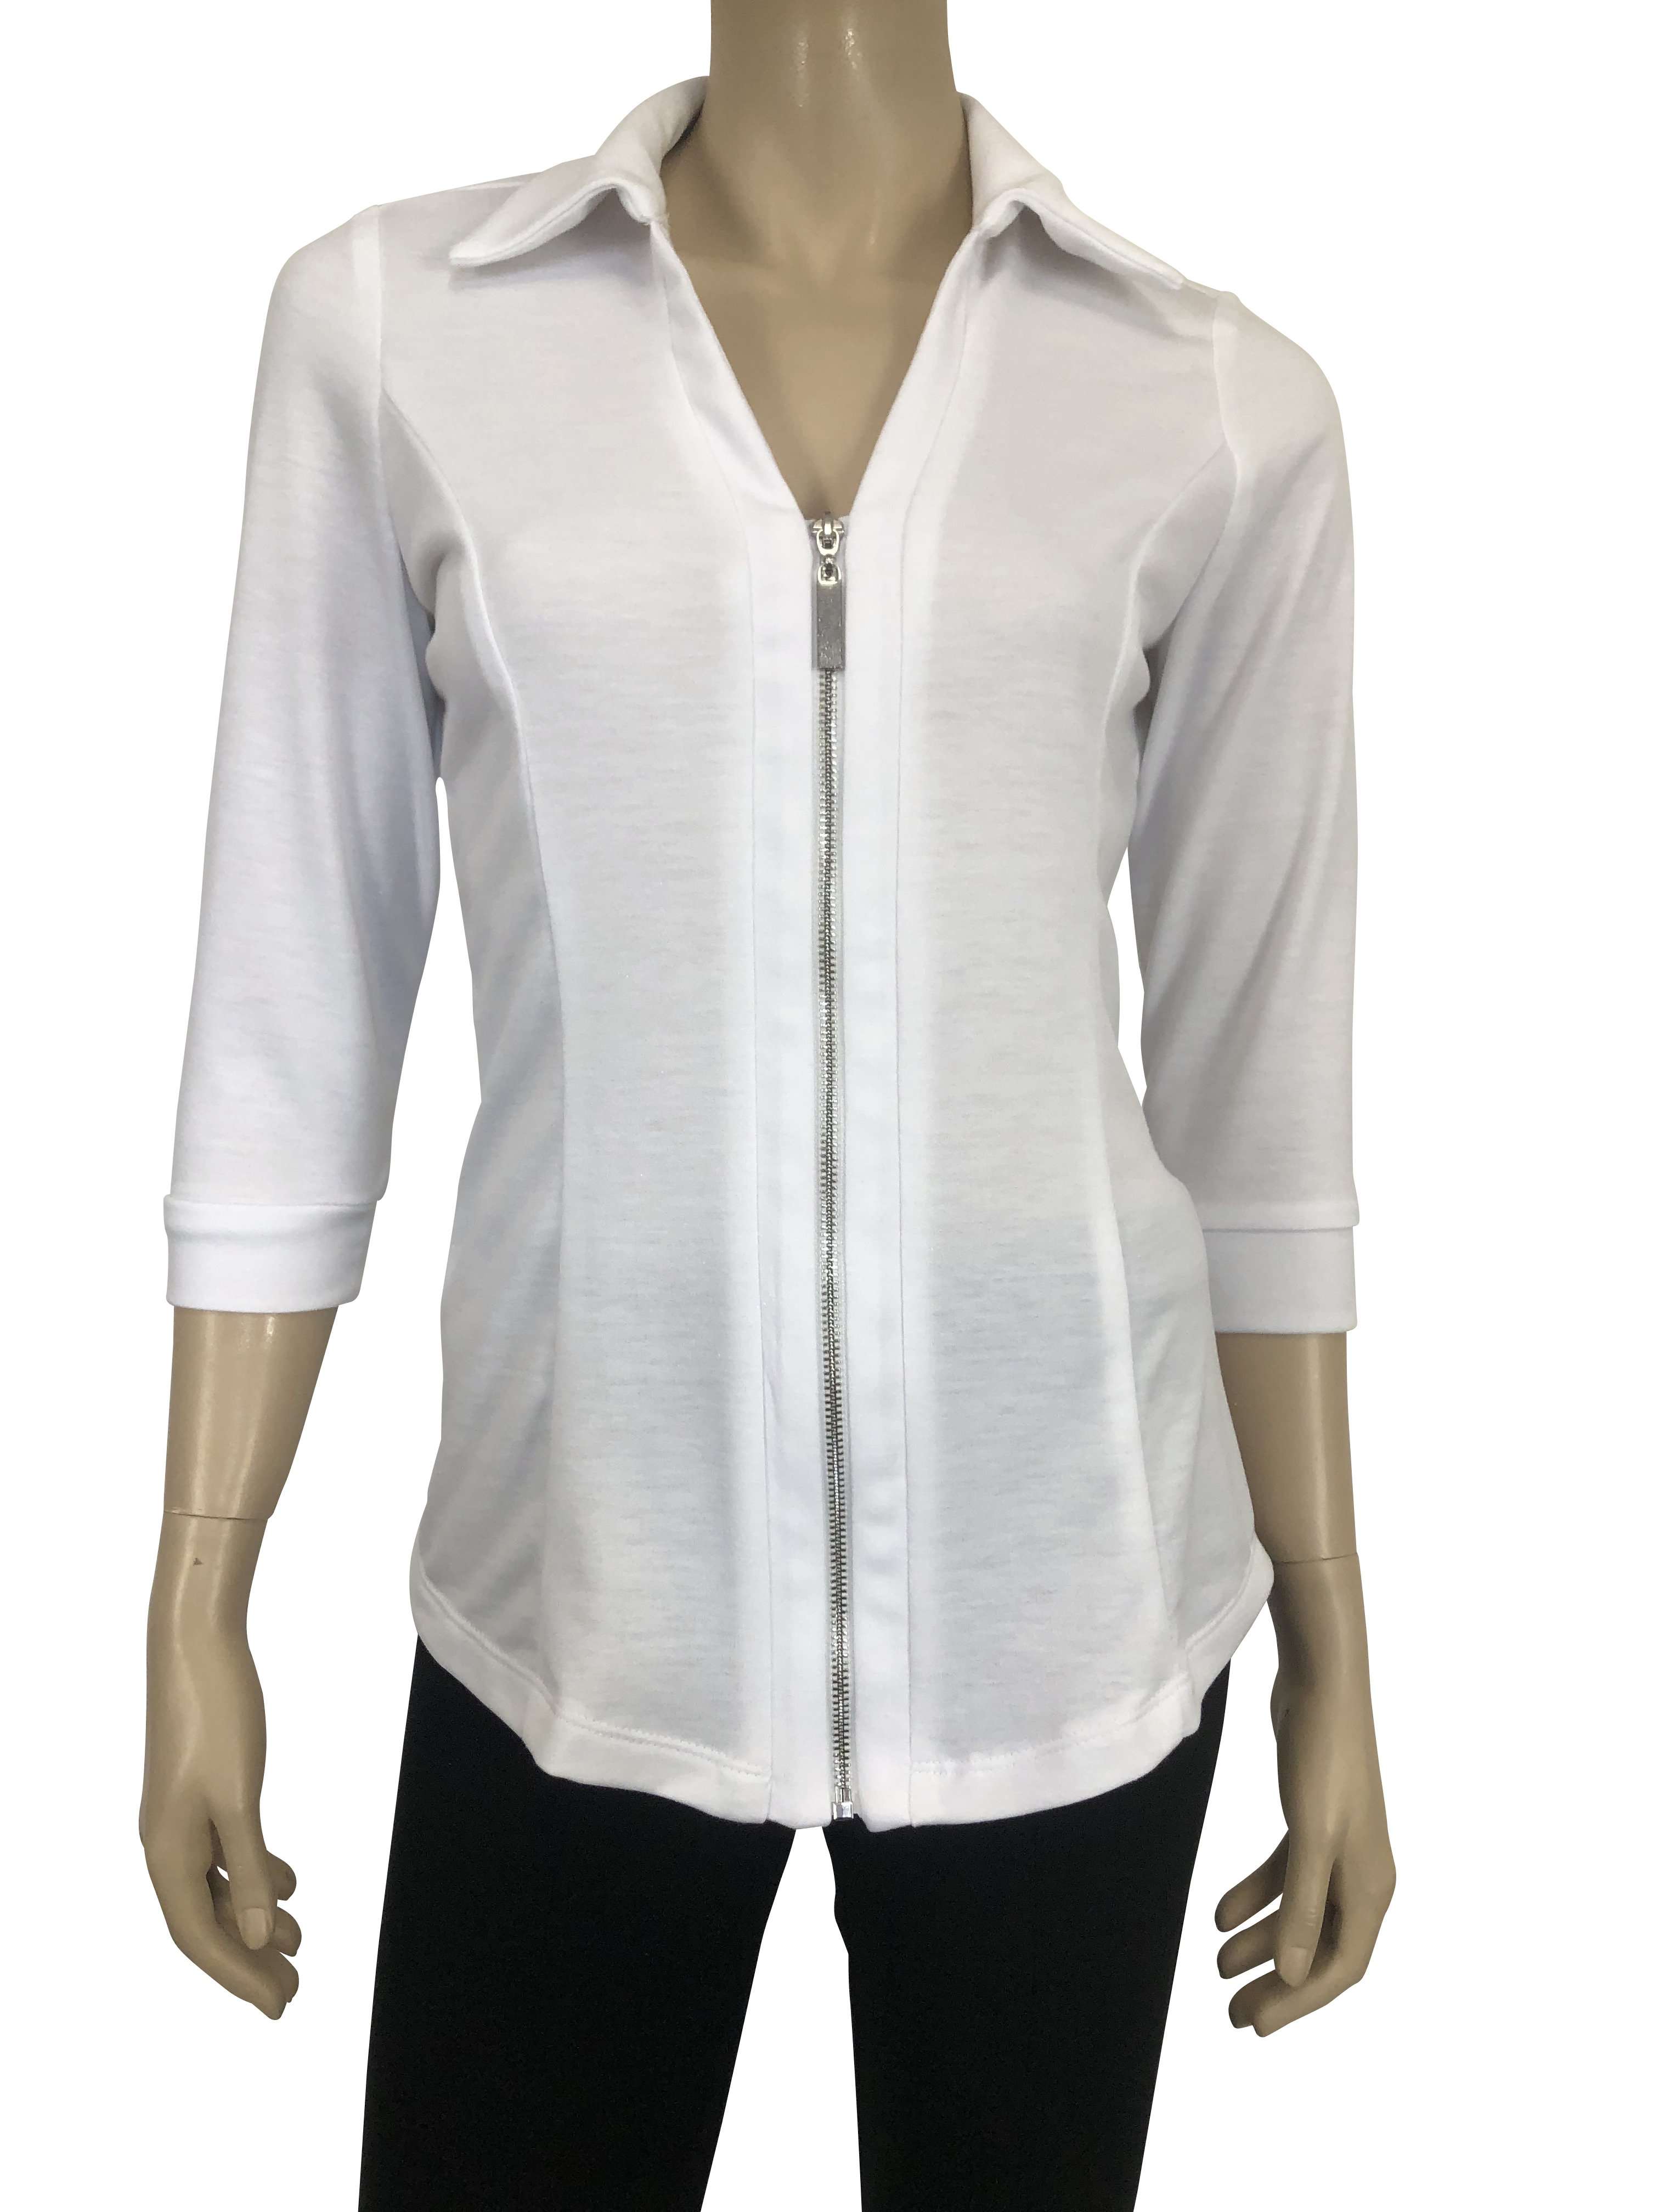 Women's White Blouse On Sale Quality Stretch Fabric with Zipper Front Made in Canada on Sale Now - Yvonne Marie - Yvonne Marie